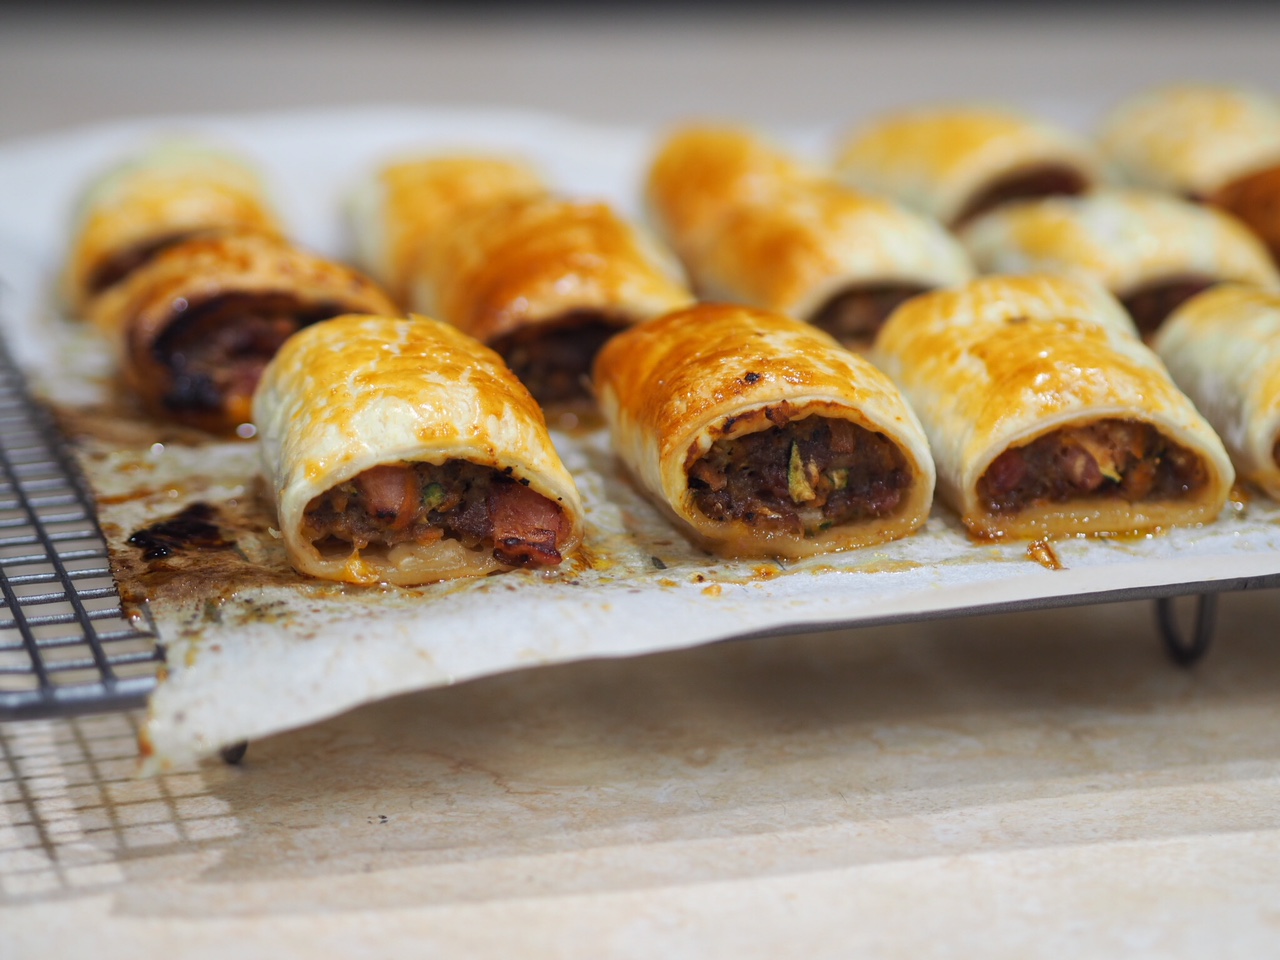 Beef, Bacon and Vegetable Sausage Rolls